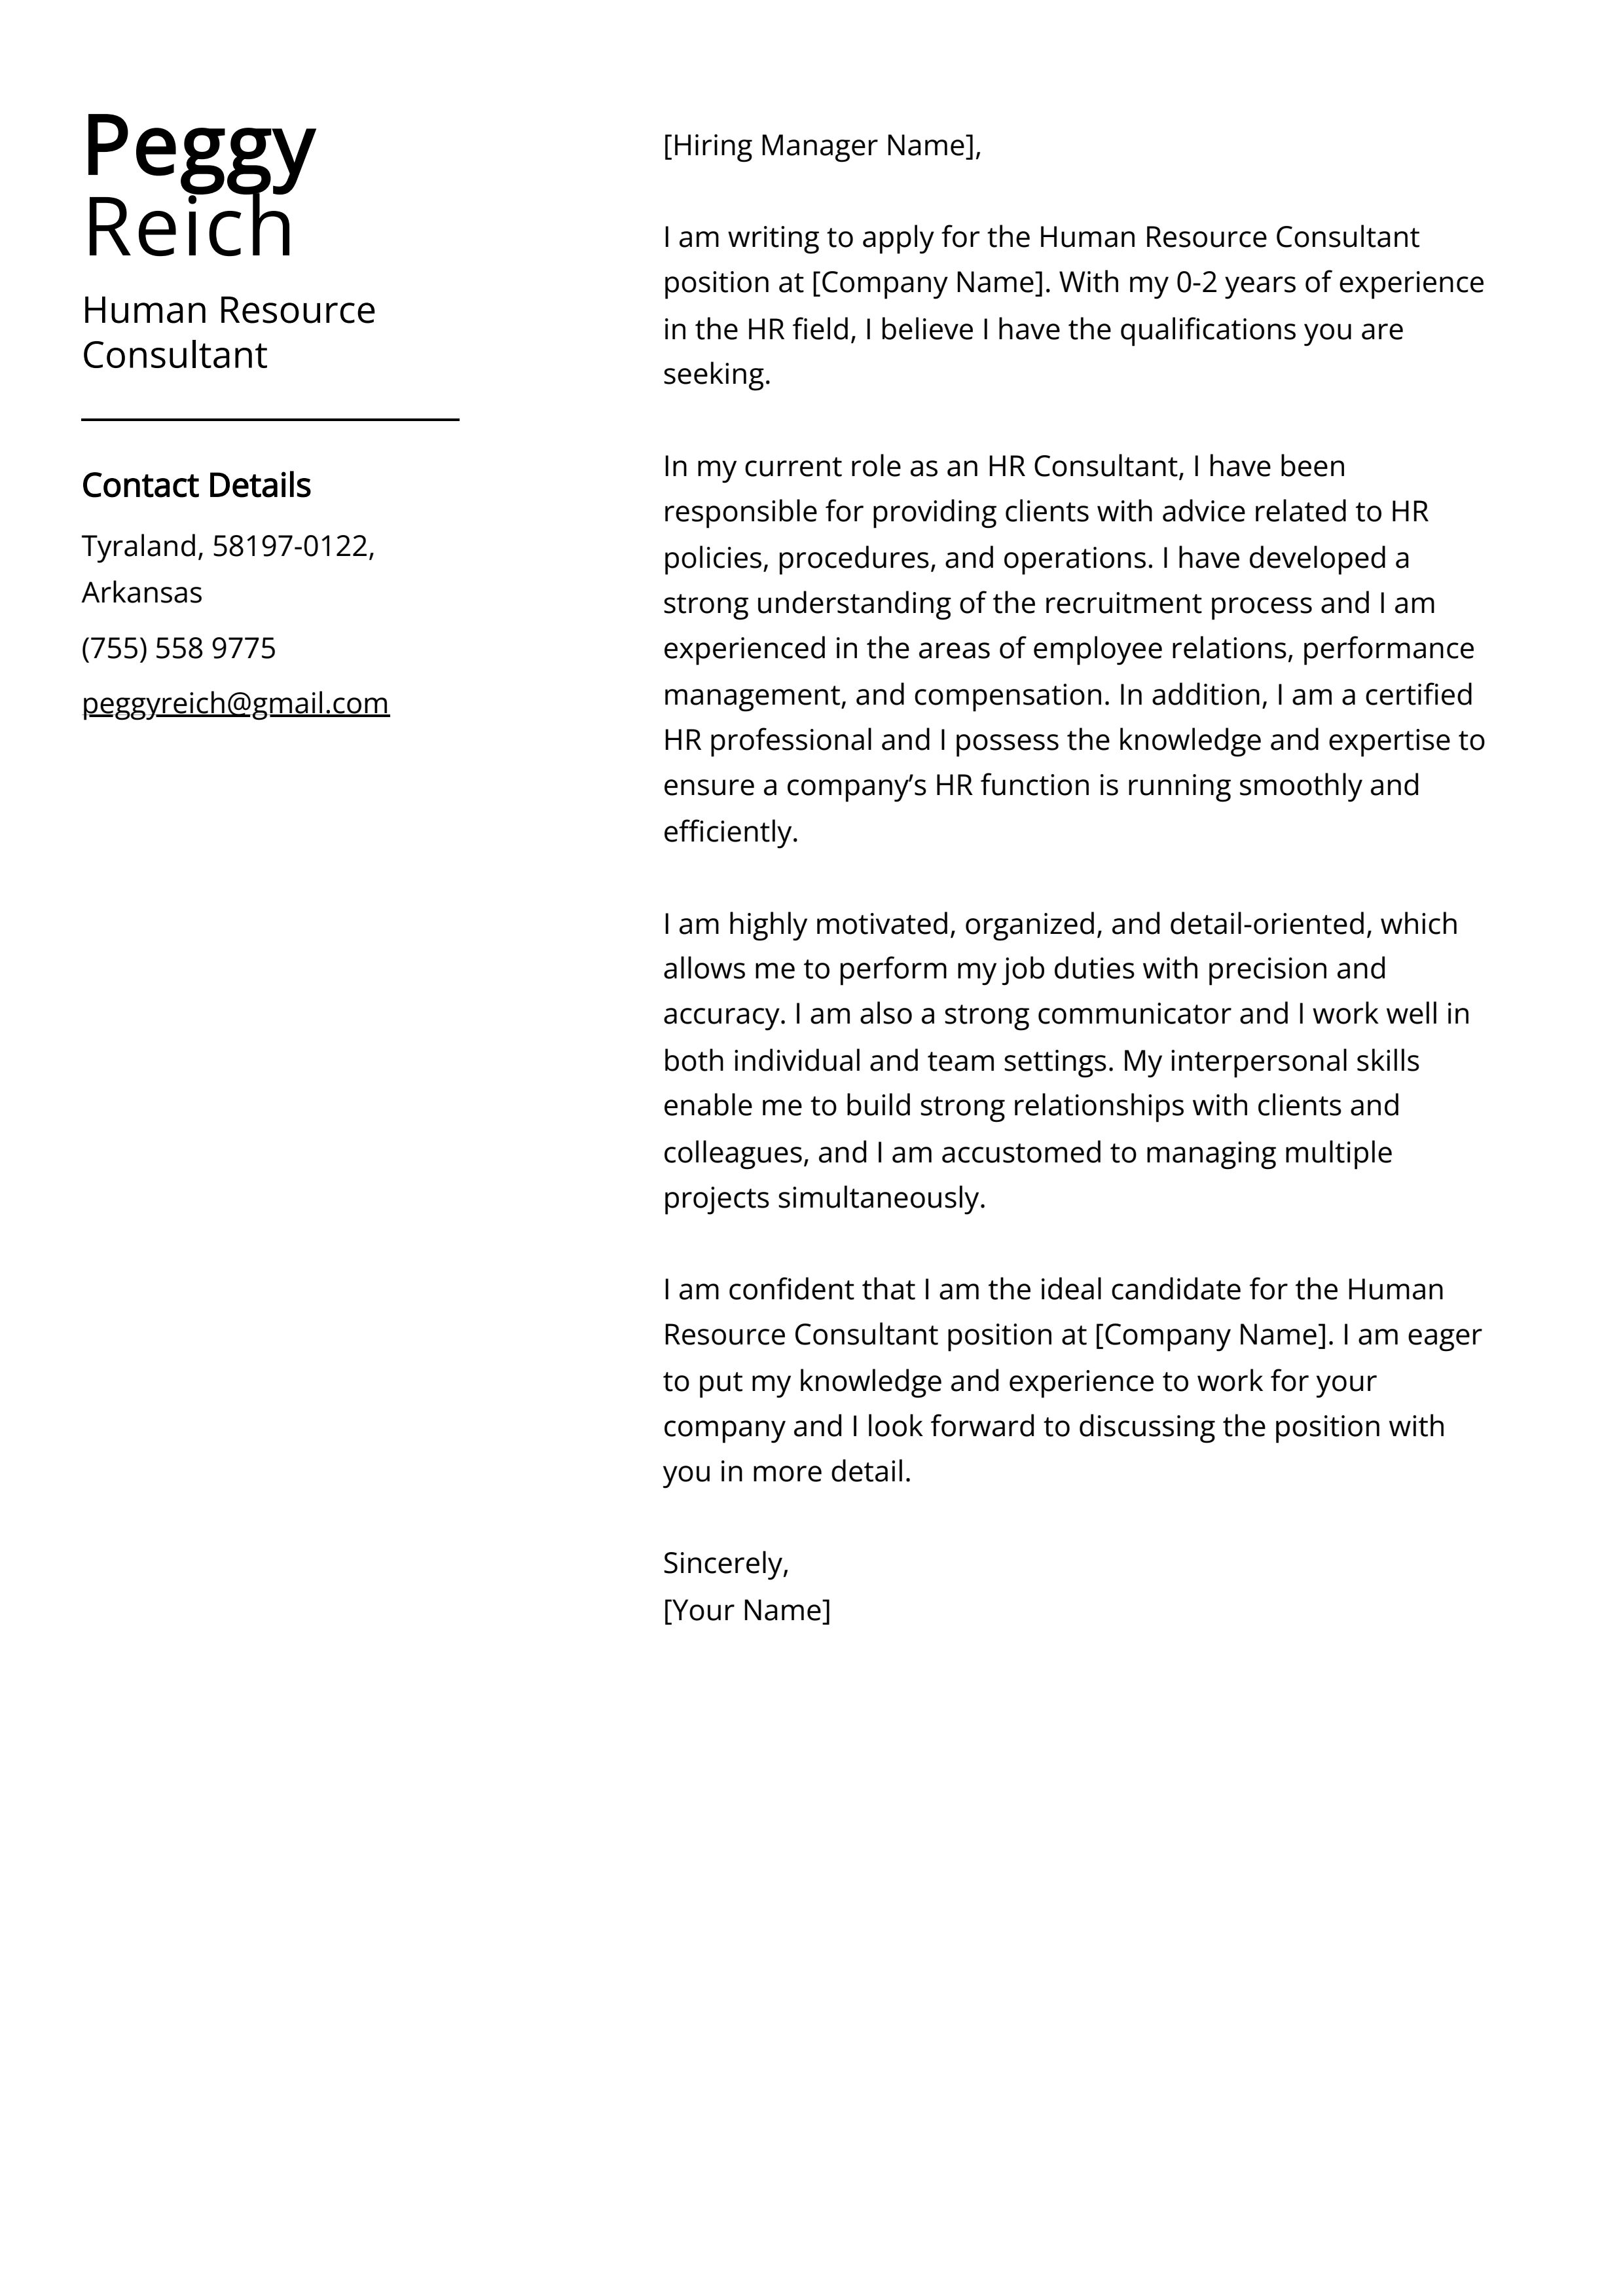 Human Resource Consultant Cover Letter Example